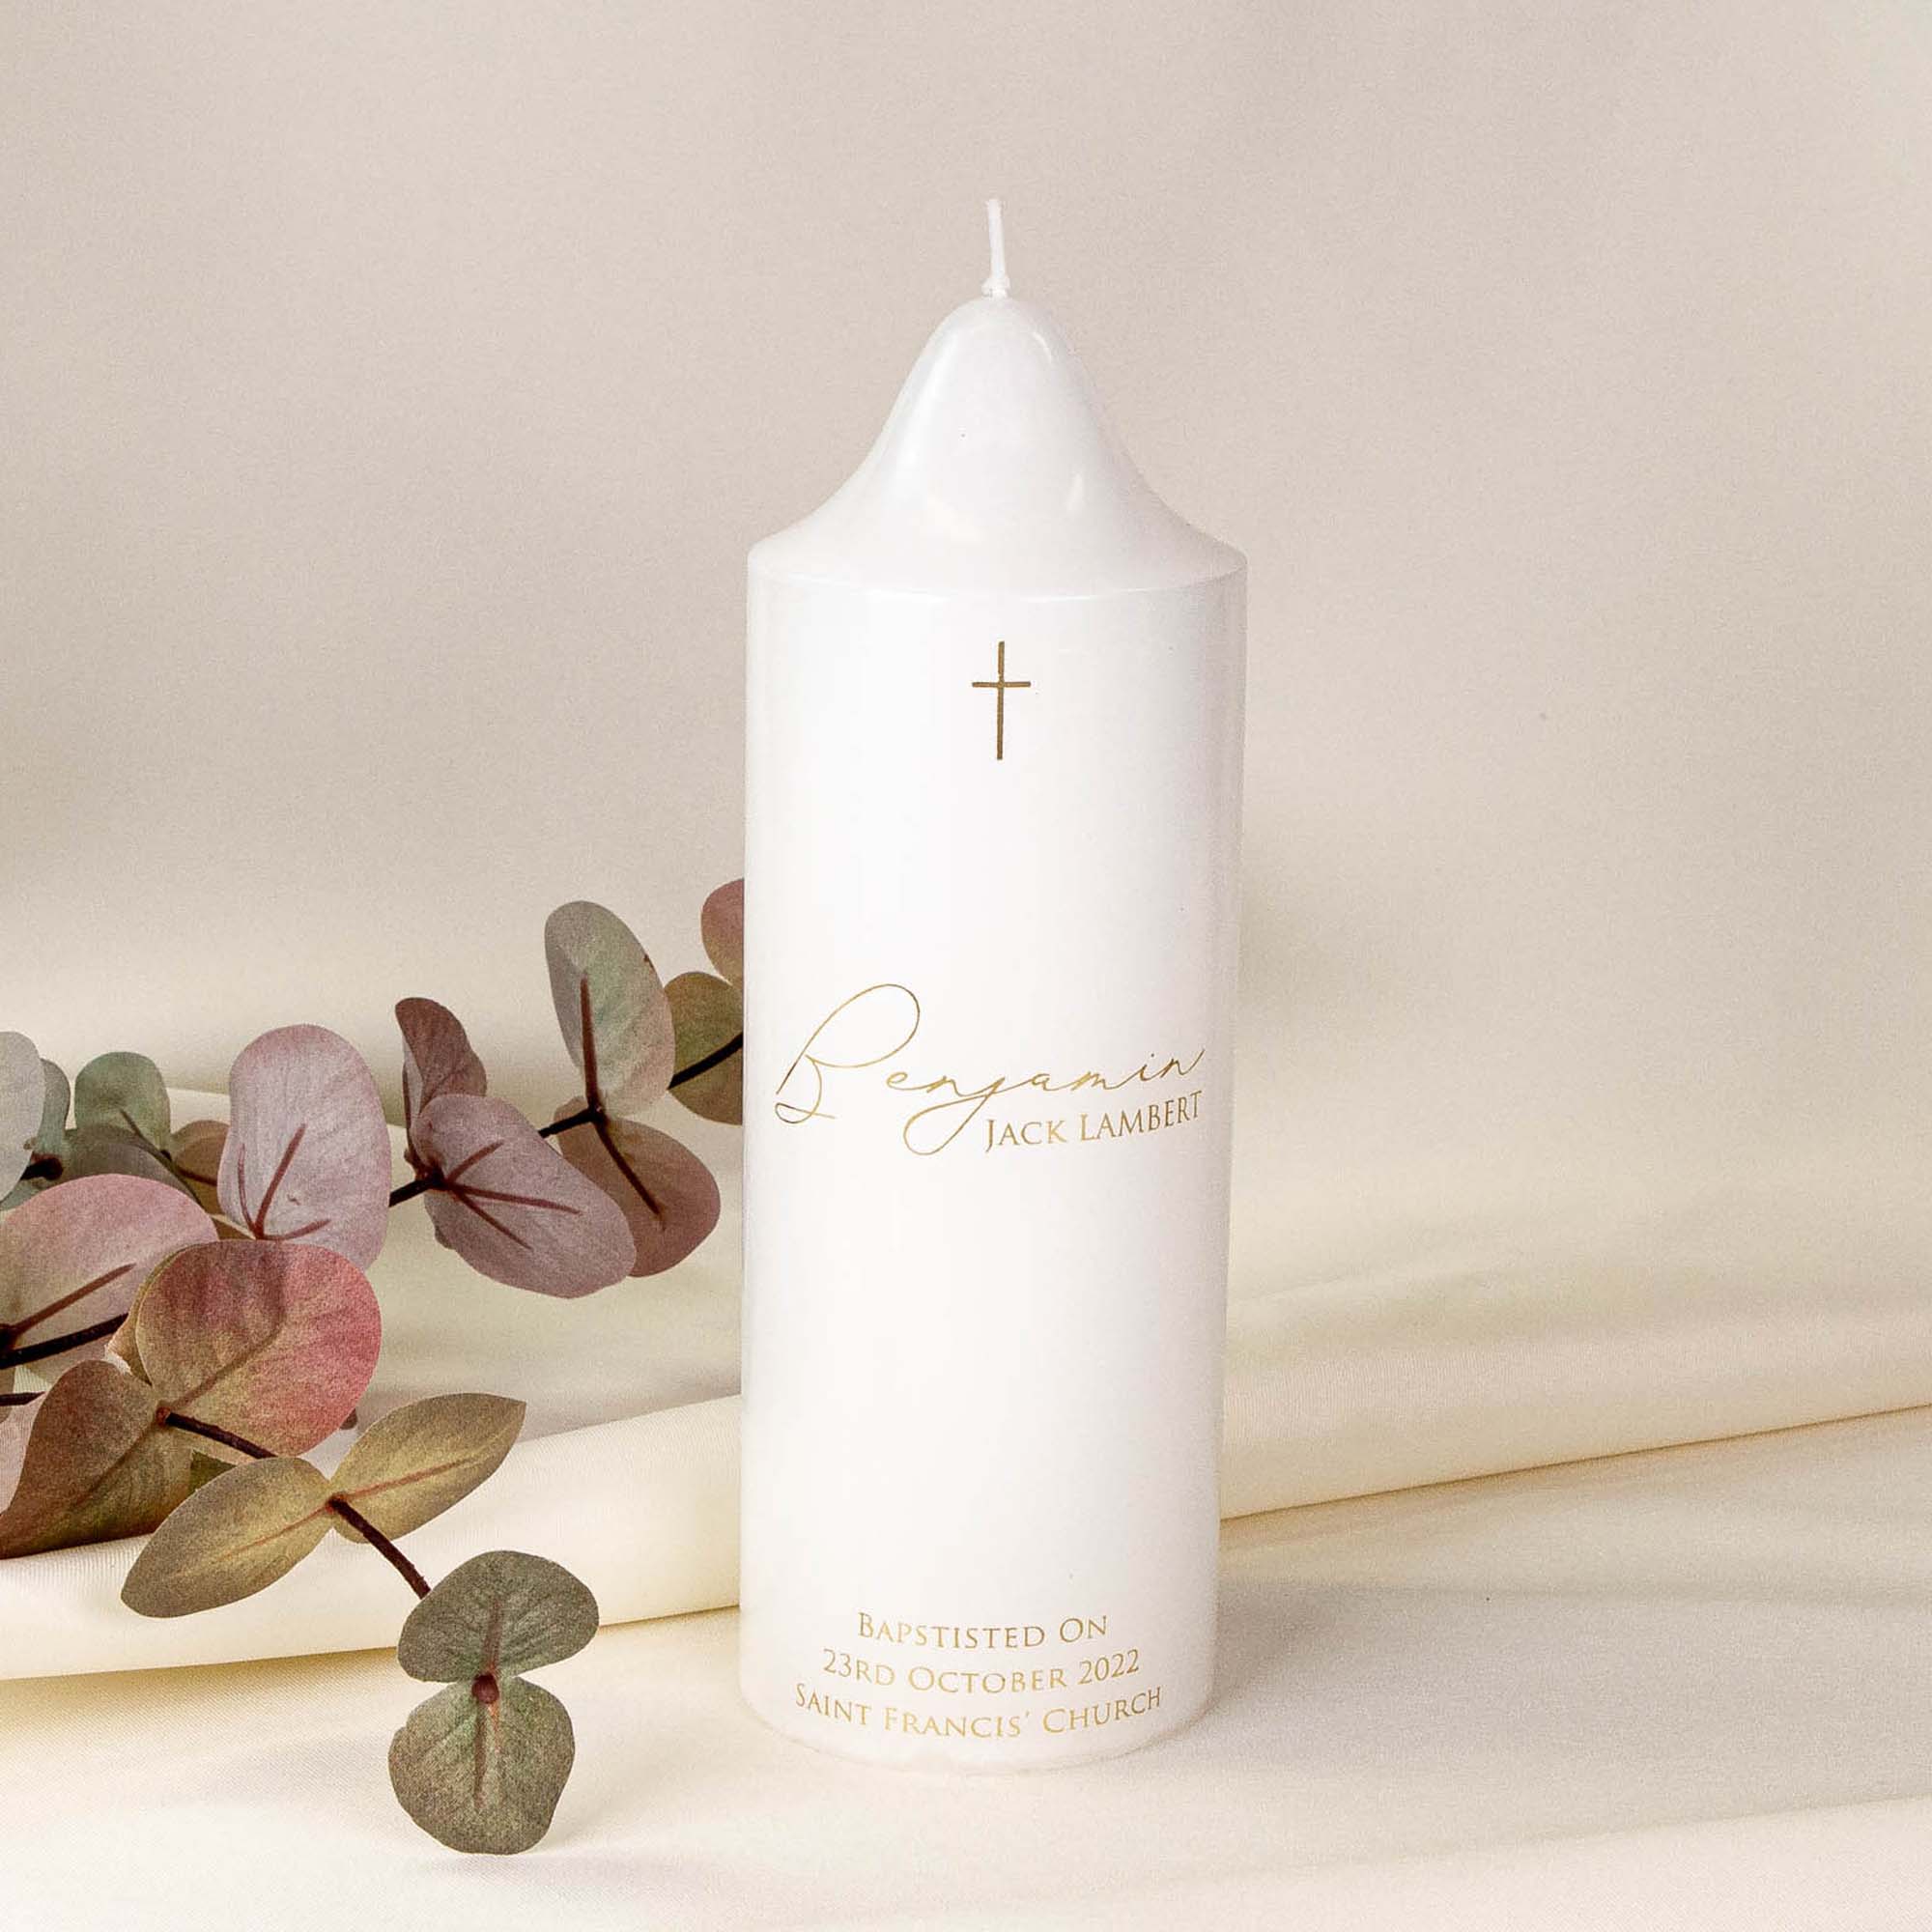 Personalised white baptism candle in gold text as "Benjamin JACK LAMBERT" as the name and his baptism date also on it.